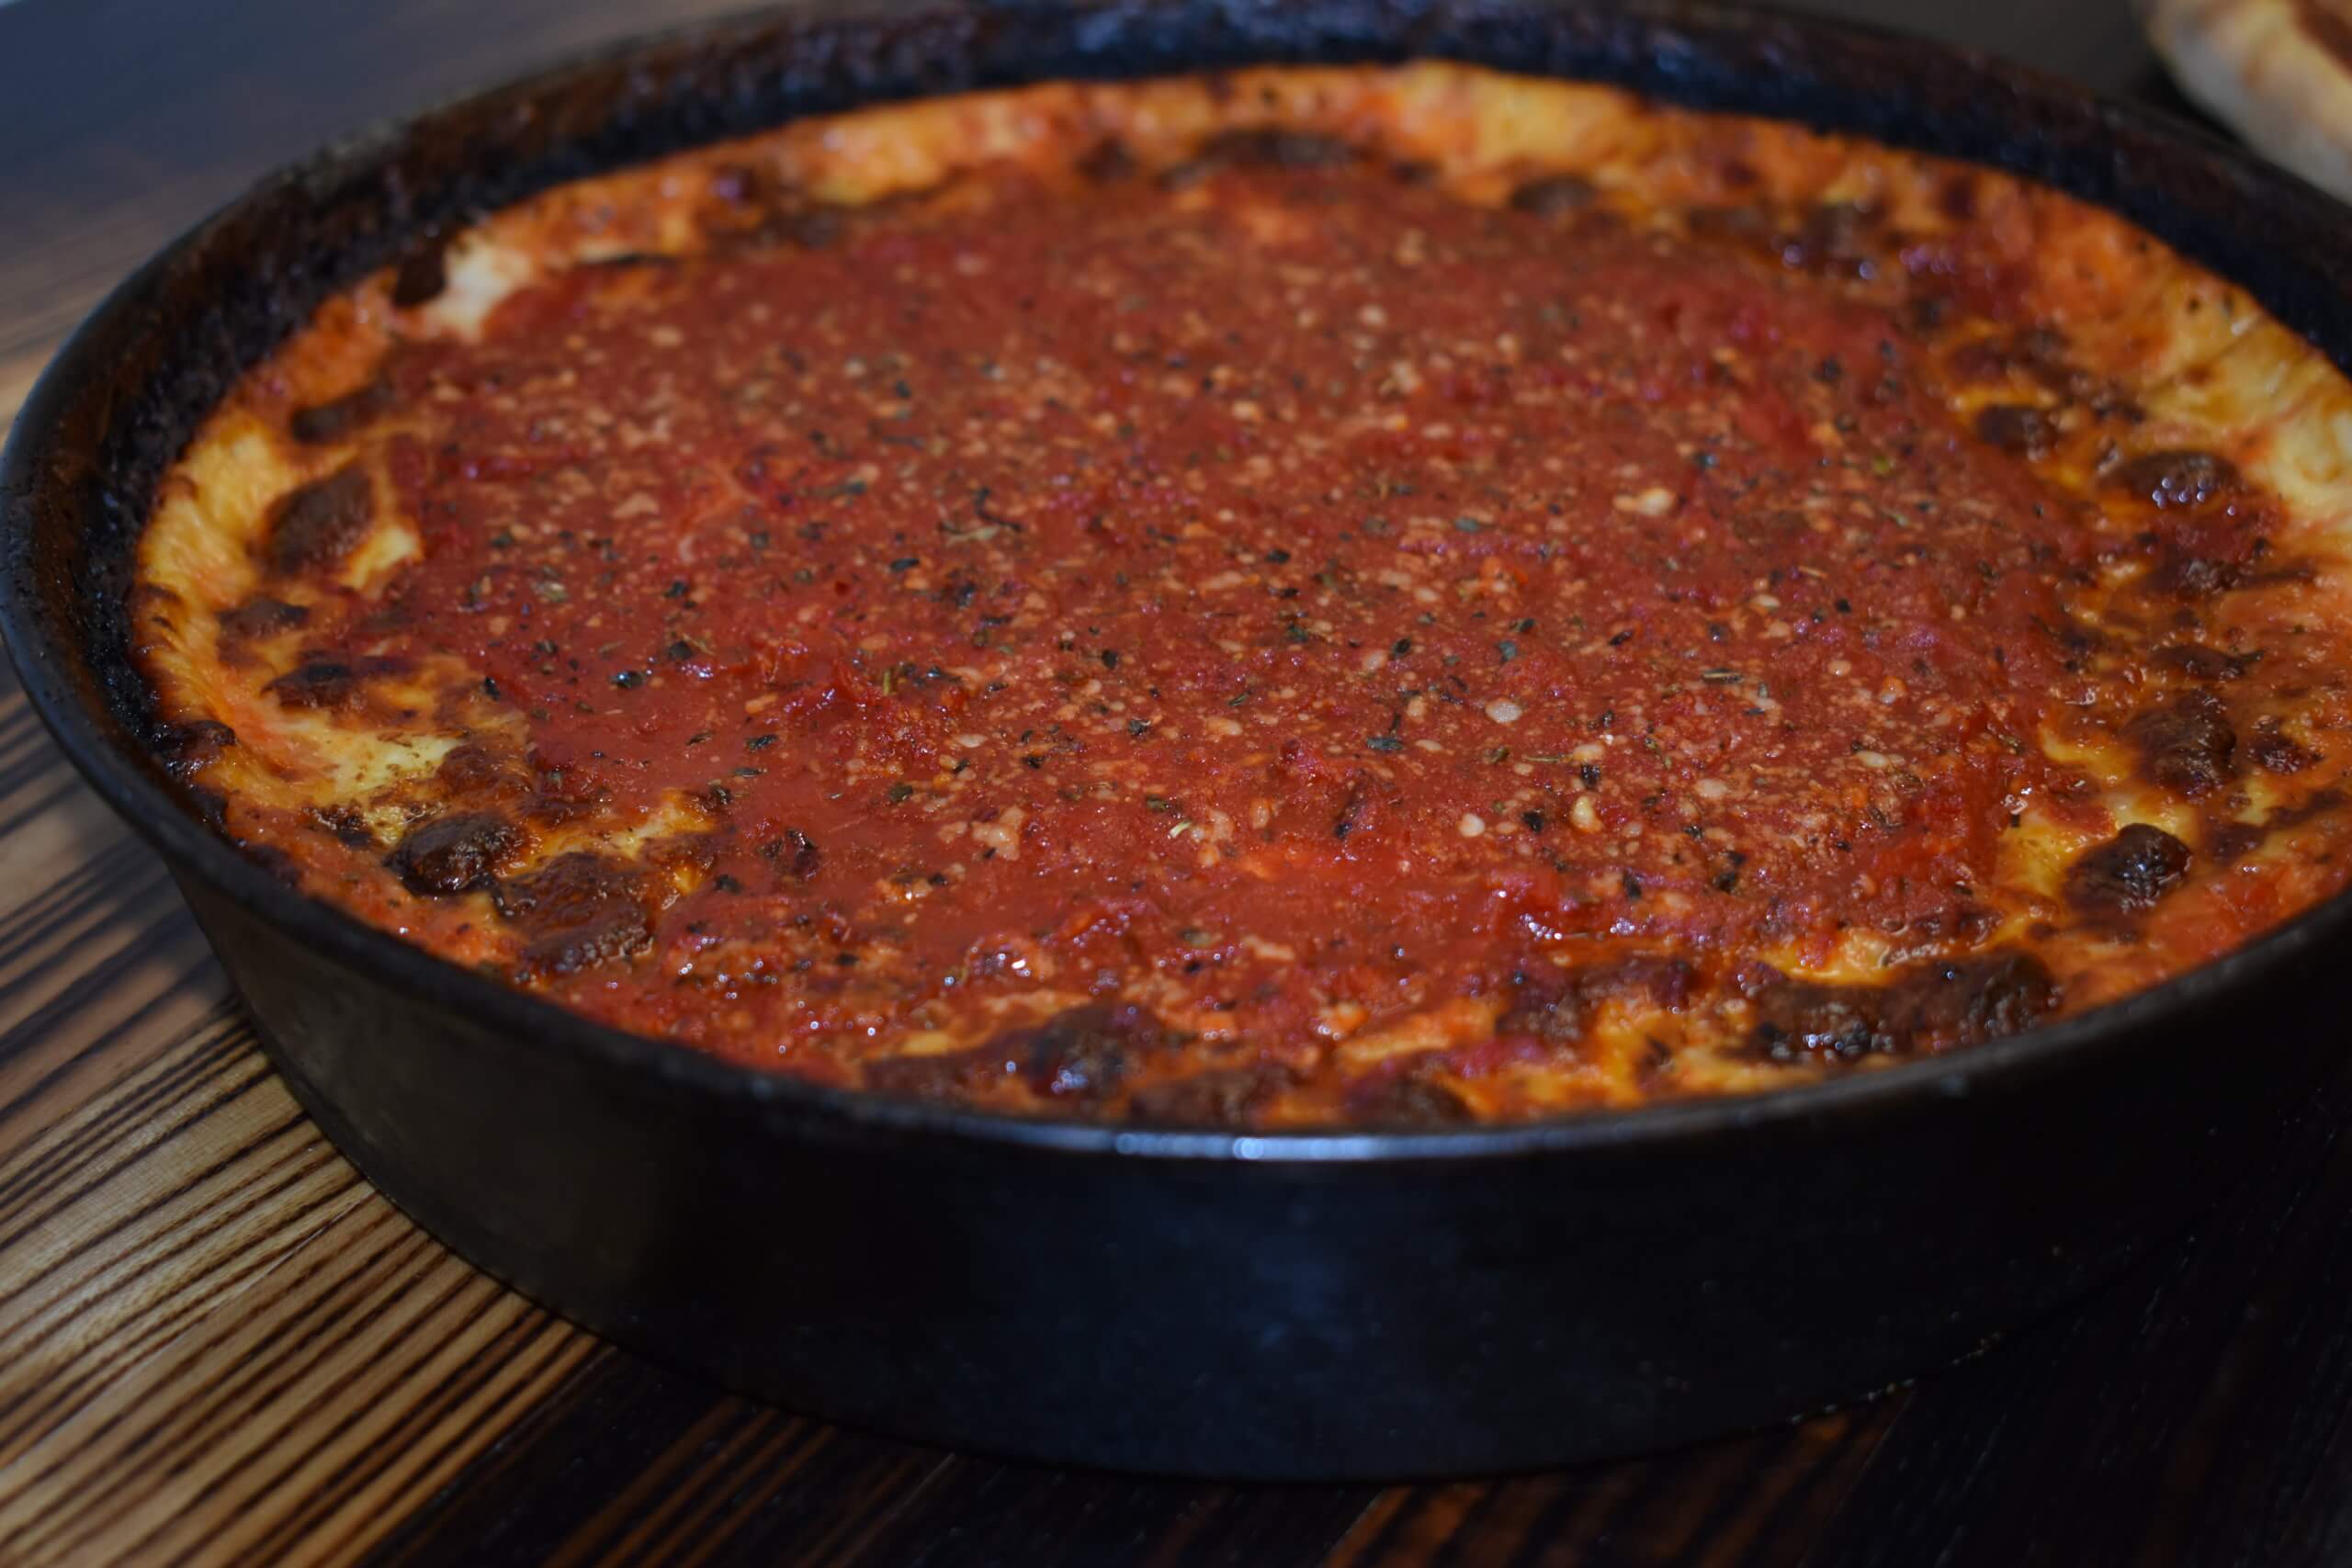 How to make deep dish pizza